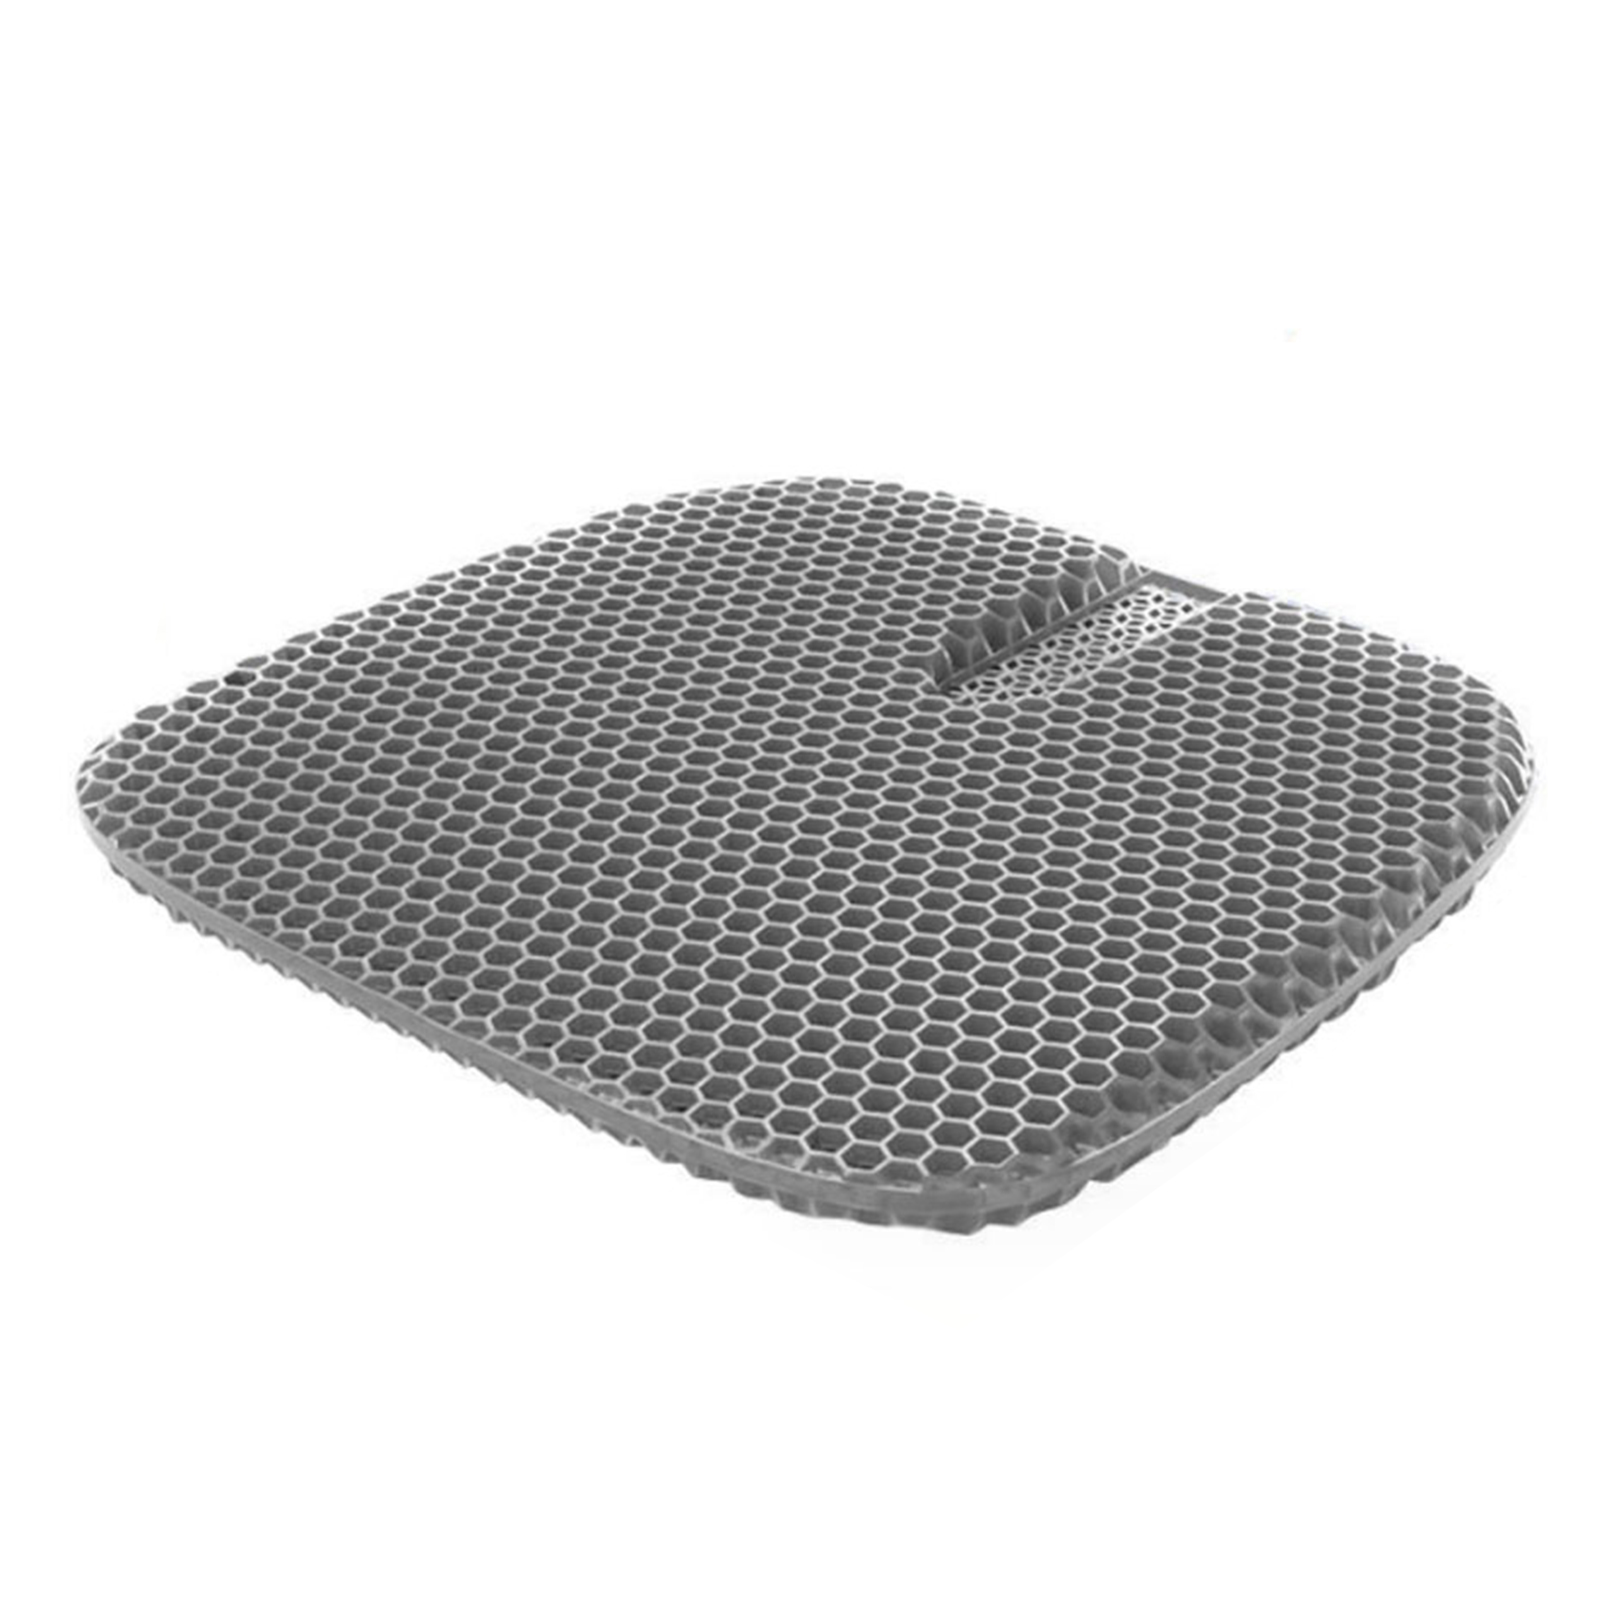 Car Seat Cushion Gel Cooling Pad Thick Big Breathable 3D Honeycomb Design Absorbs Pressure Seat Cushion